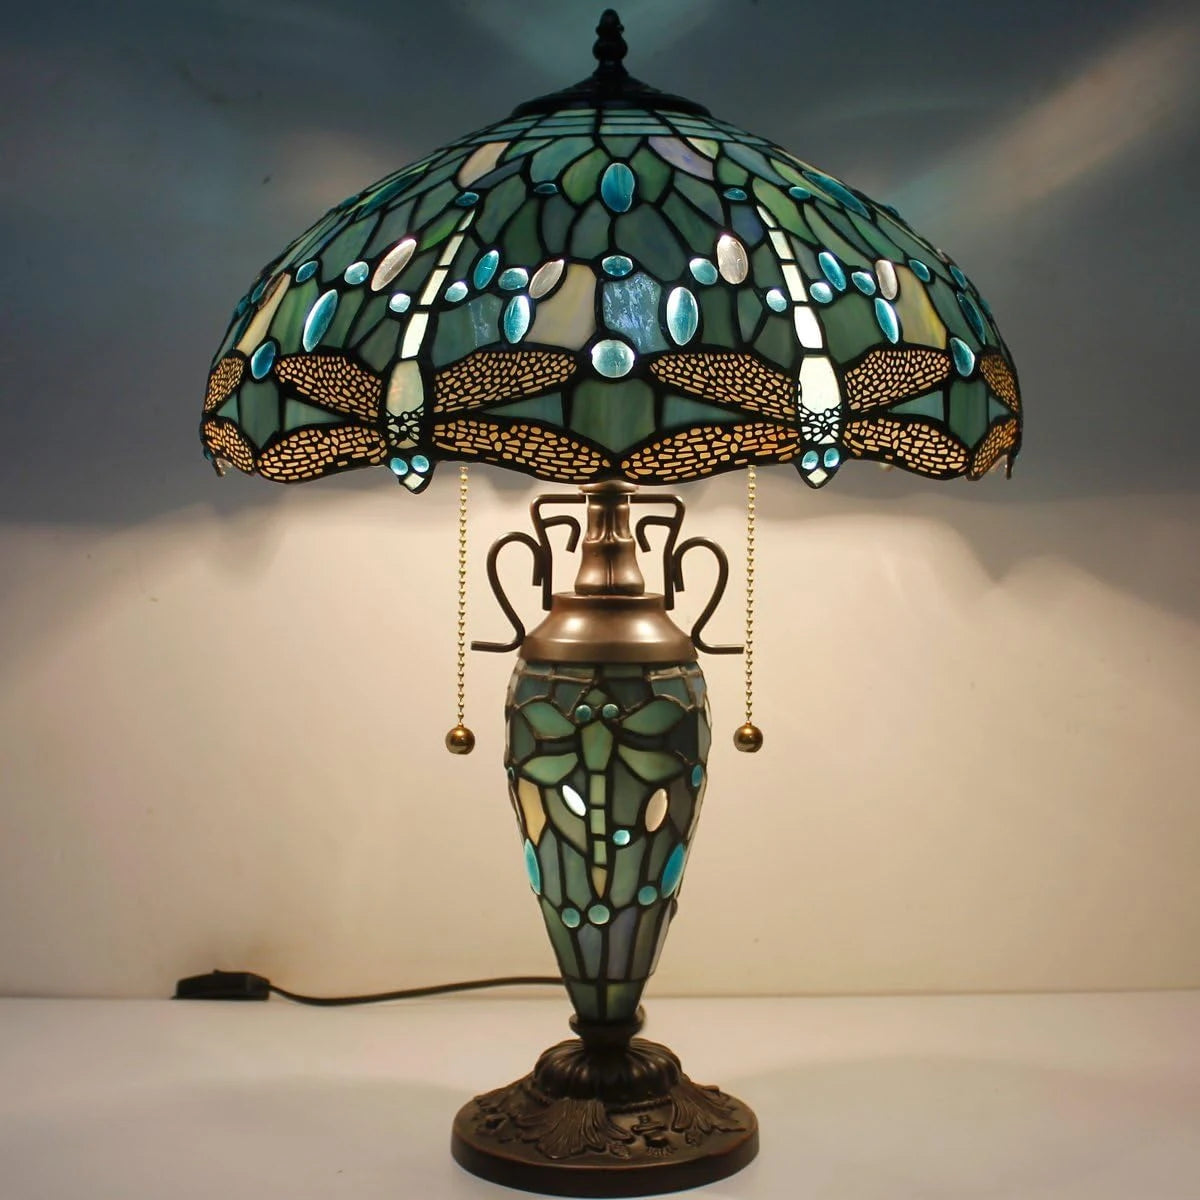 Tiffany Table Lamp Sea Blue Stained Glass Dragonfly Style